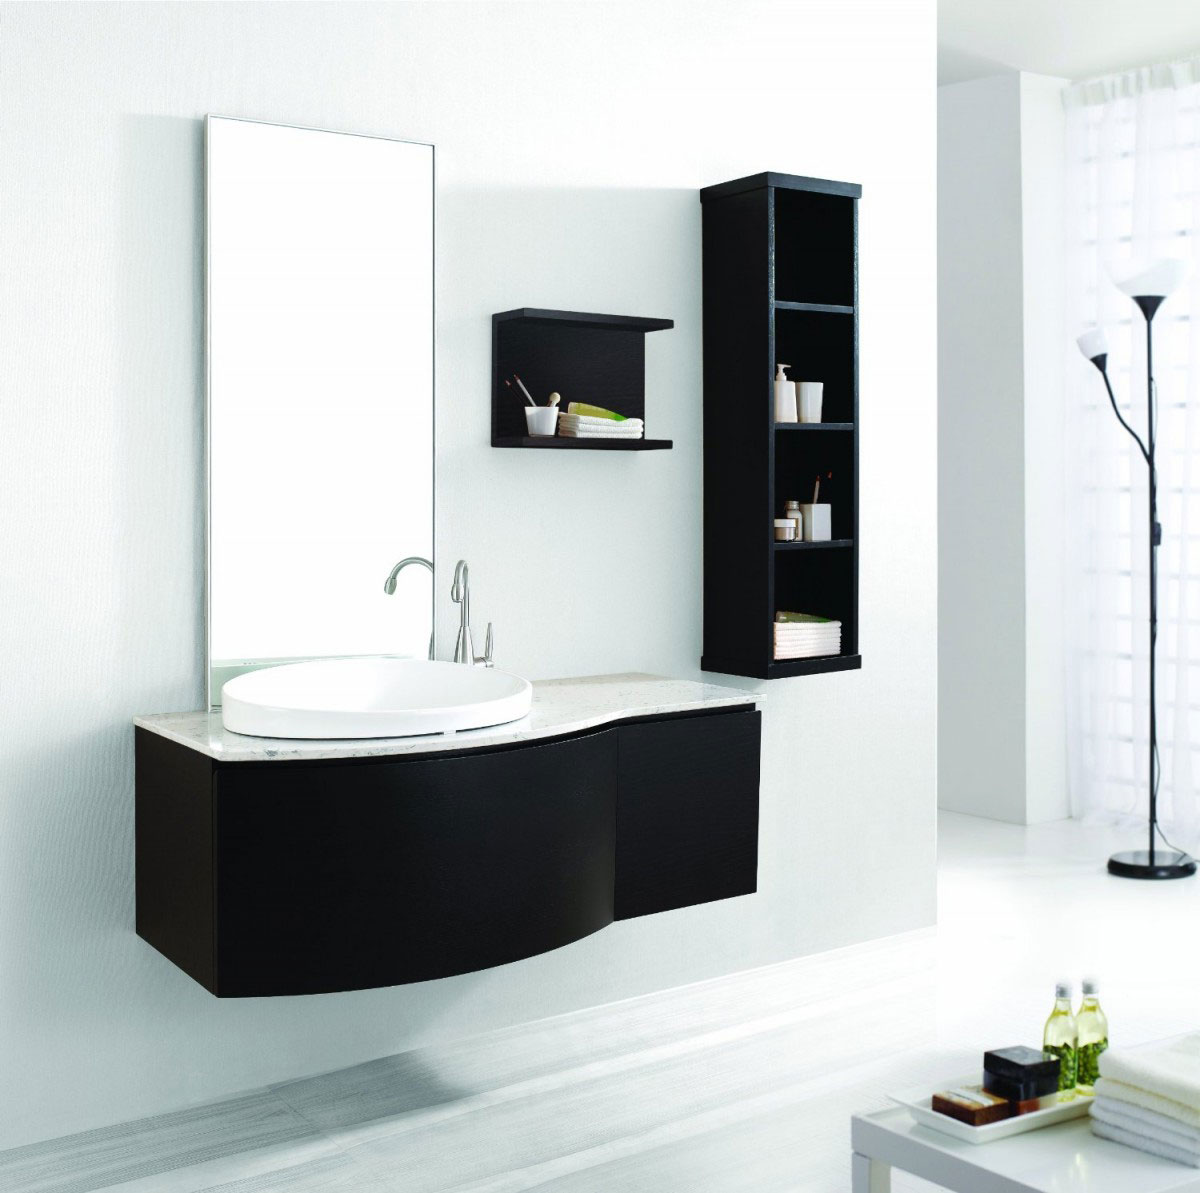 Modern Bathroom Color Glamorous Modern Bathroom Applying White Color Room And Black Furniture Completed With Bathroom Storage Ideas And Furnished With Wall Vessel Sink Coupled By Mirror Bathroom Bathroom Storage Ideas For Your Comfortable Bathroom